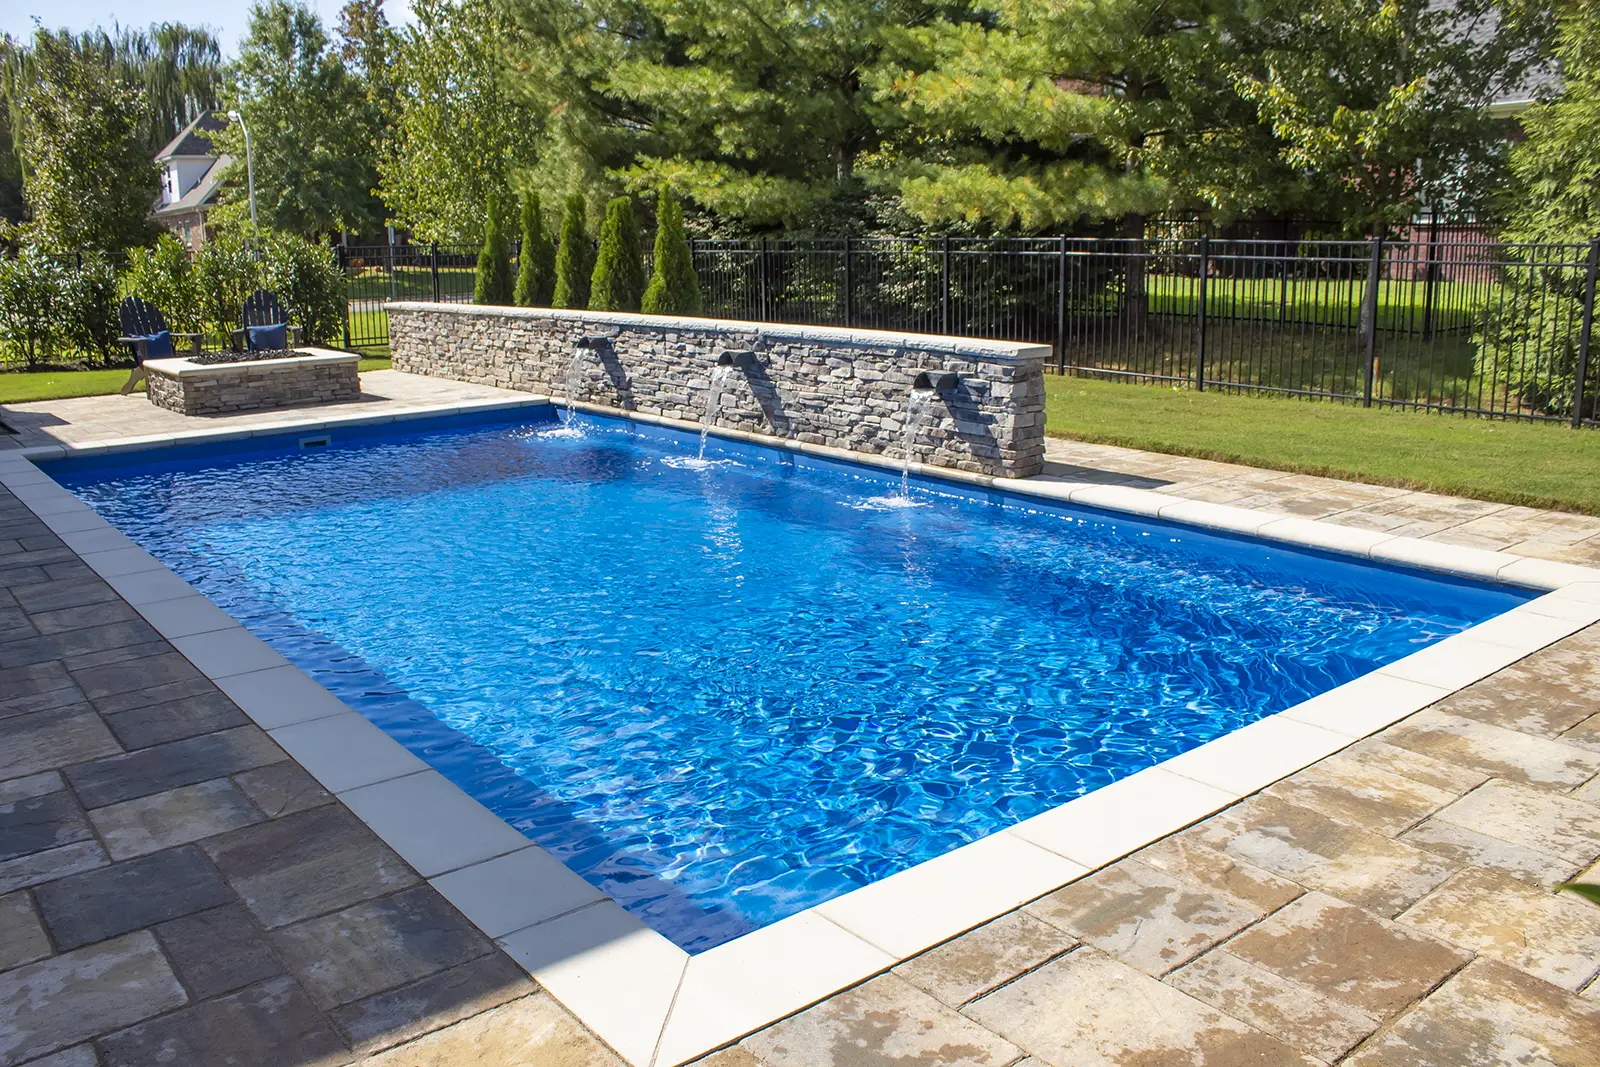 The Leisure Pools Supreme™ - from our fiberglass pool gallery